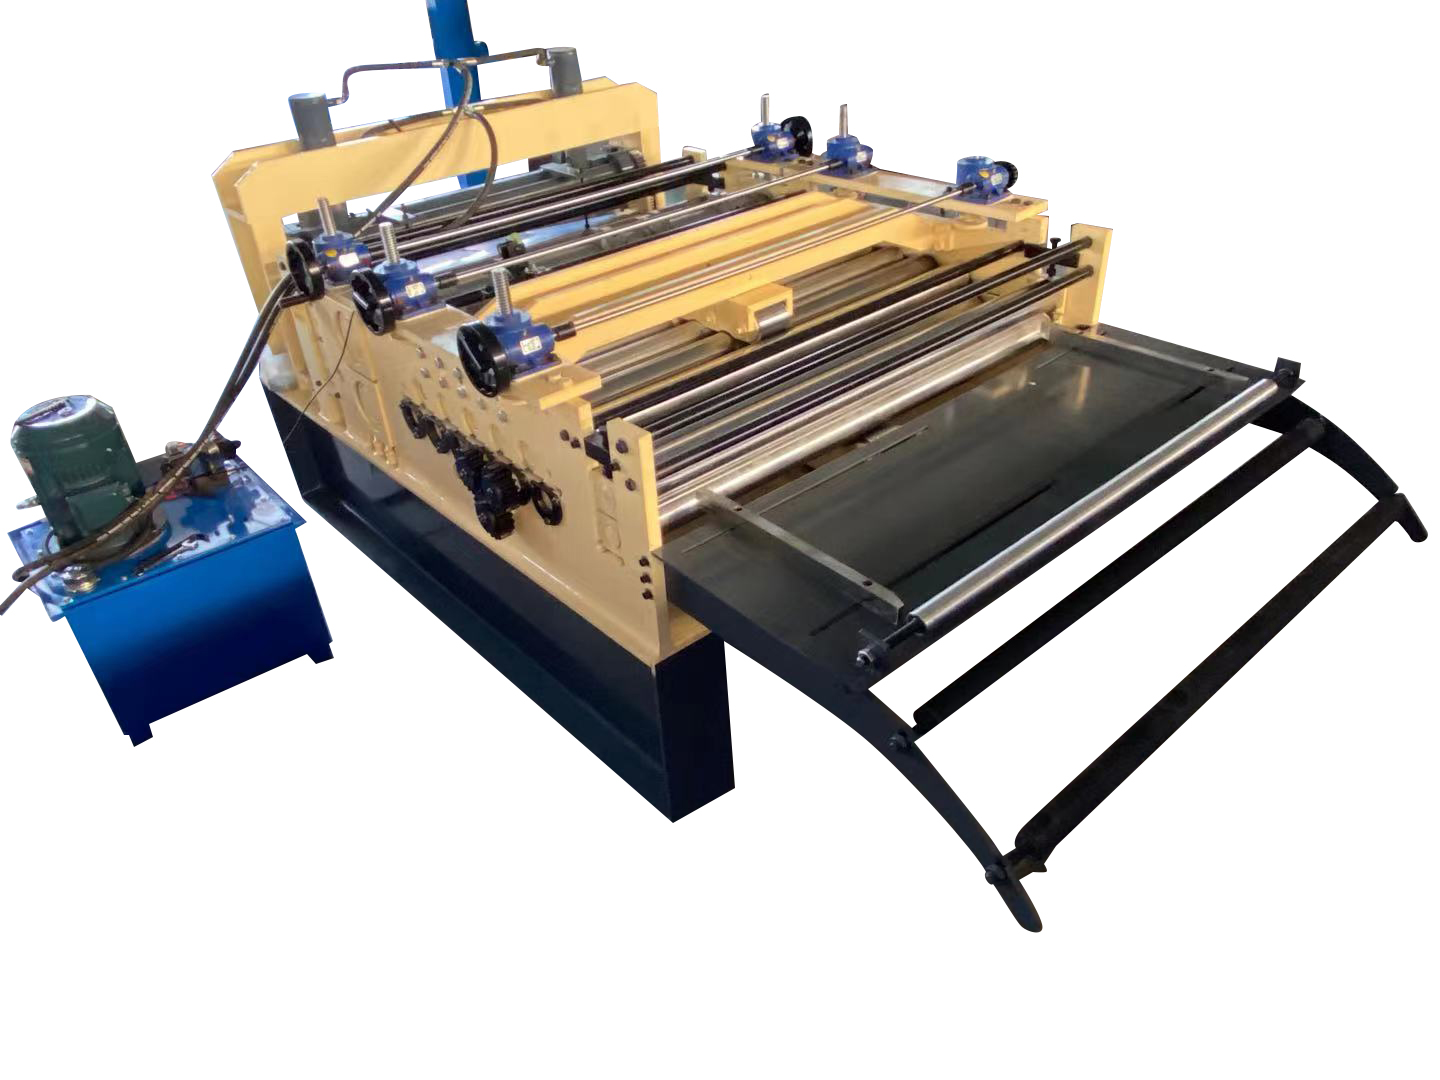  Black Steel 2-3mm Thickness Cut to Length Machine Cutting Machine with Lifting Tools6 Black Steel 2-3mm Thickness Cut to Length Machine Cutting Machine with Lifting Tools